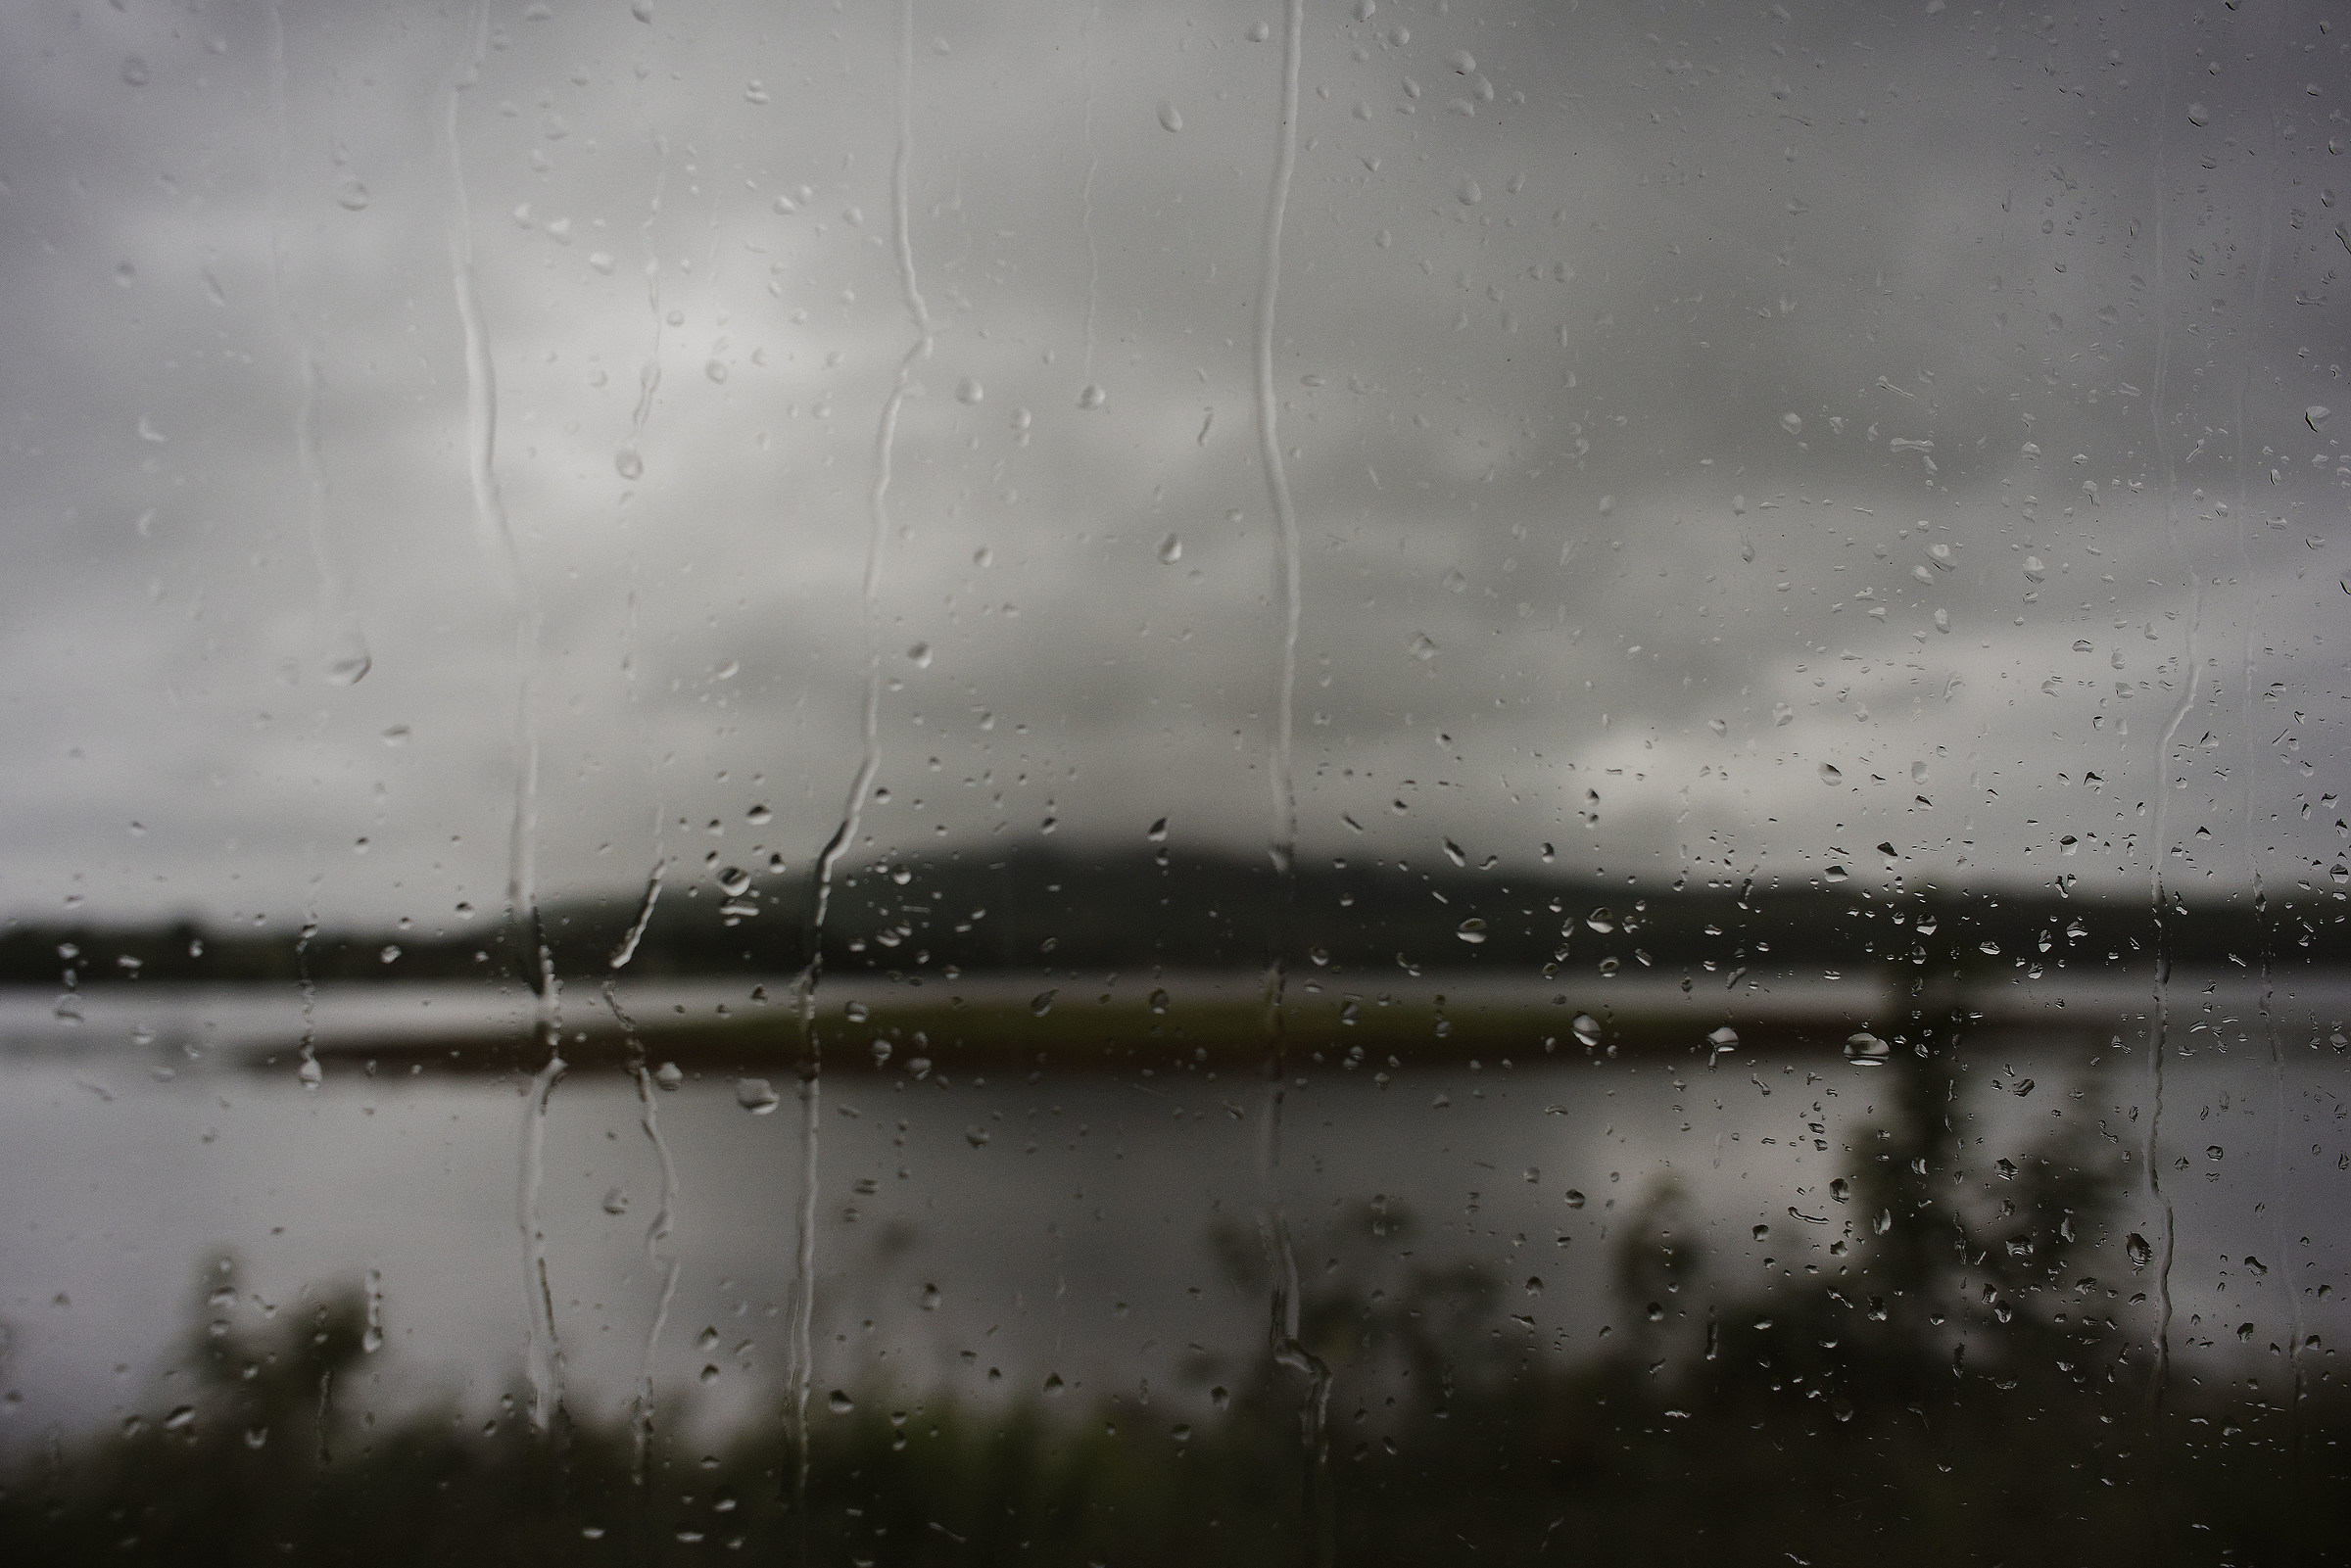 A rainy day in Isle of Mull...